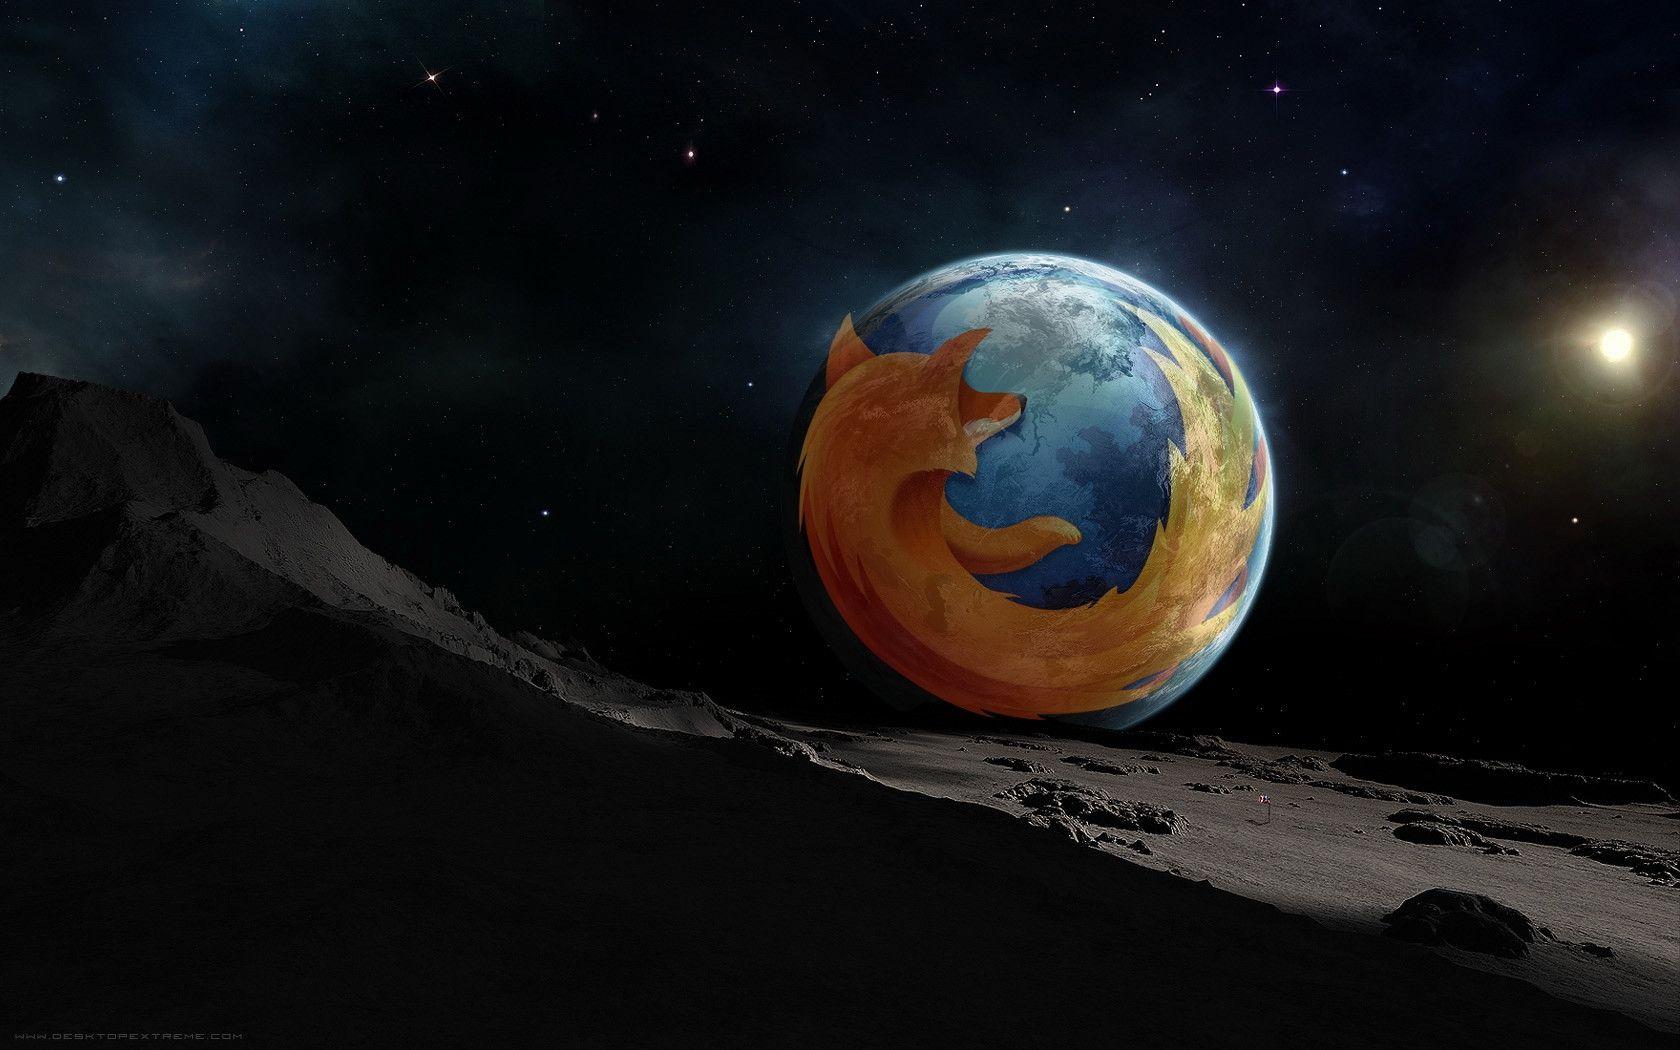 firefox and sofaplay